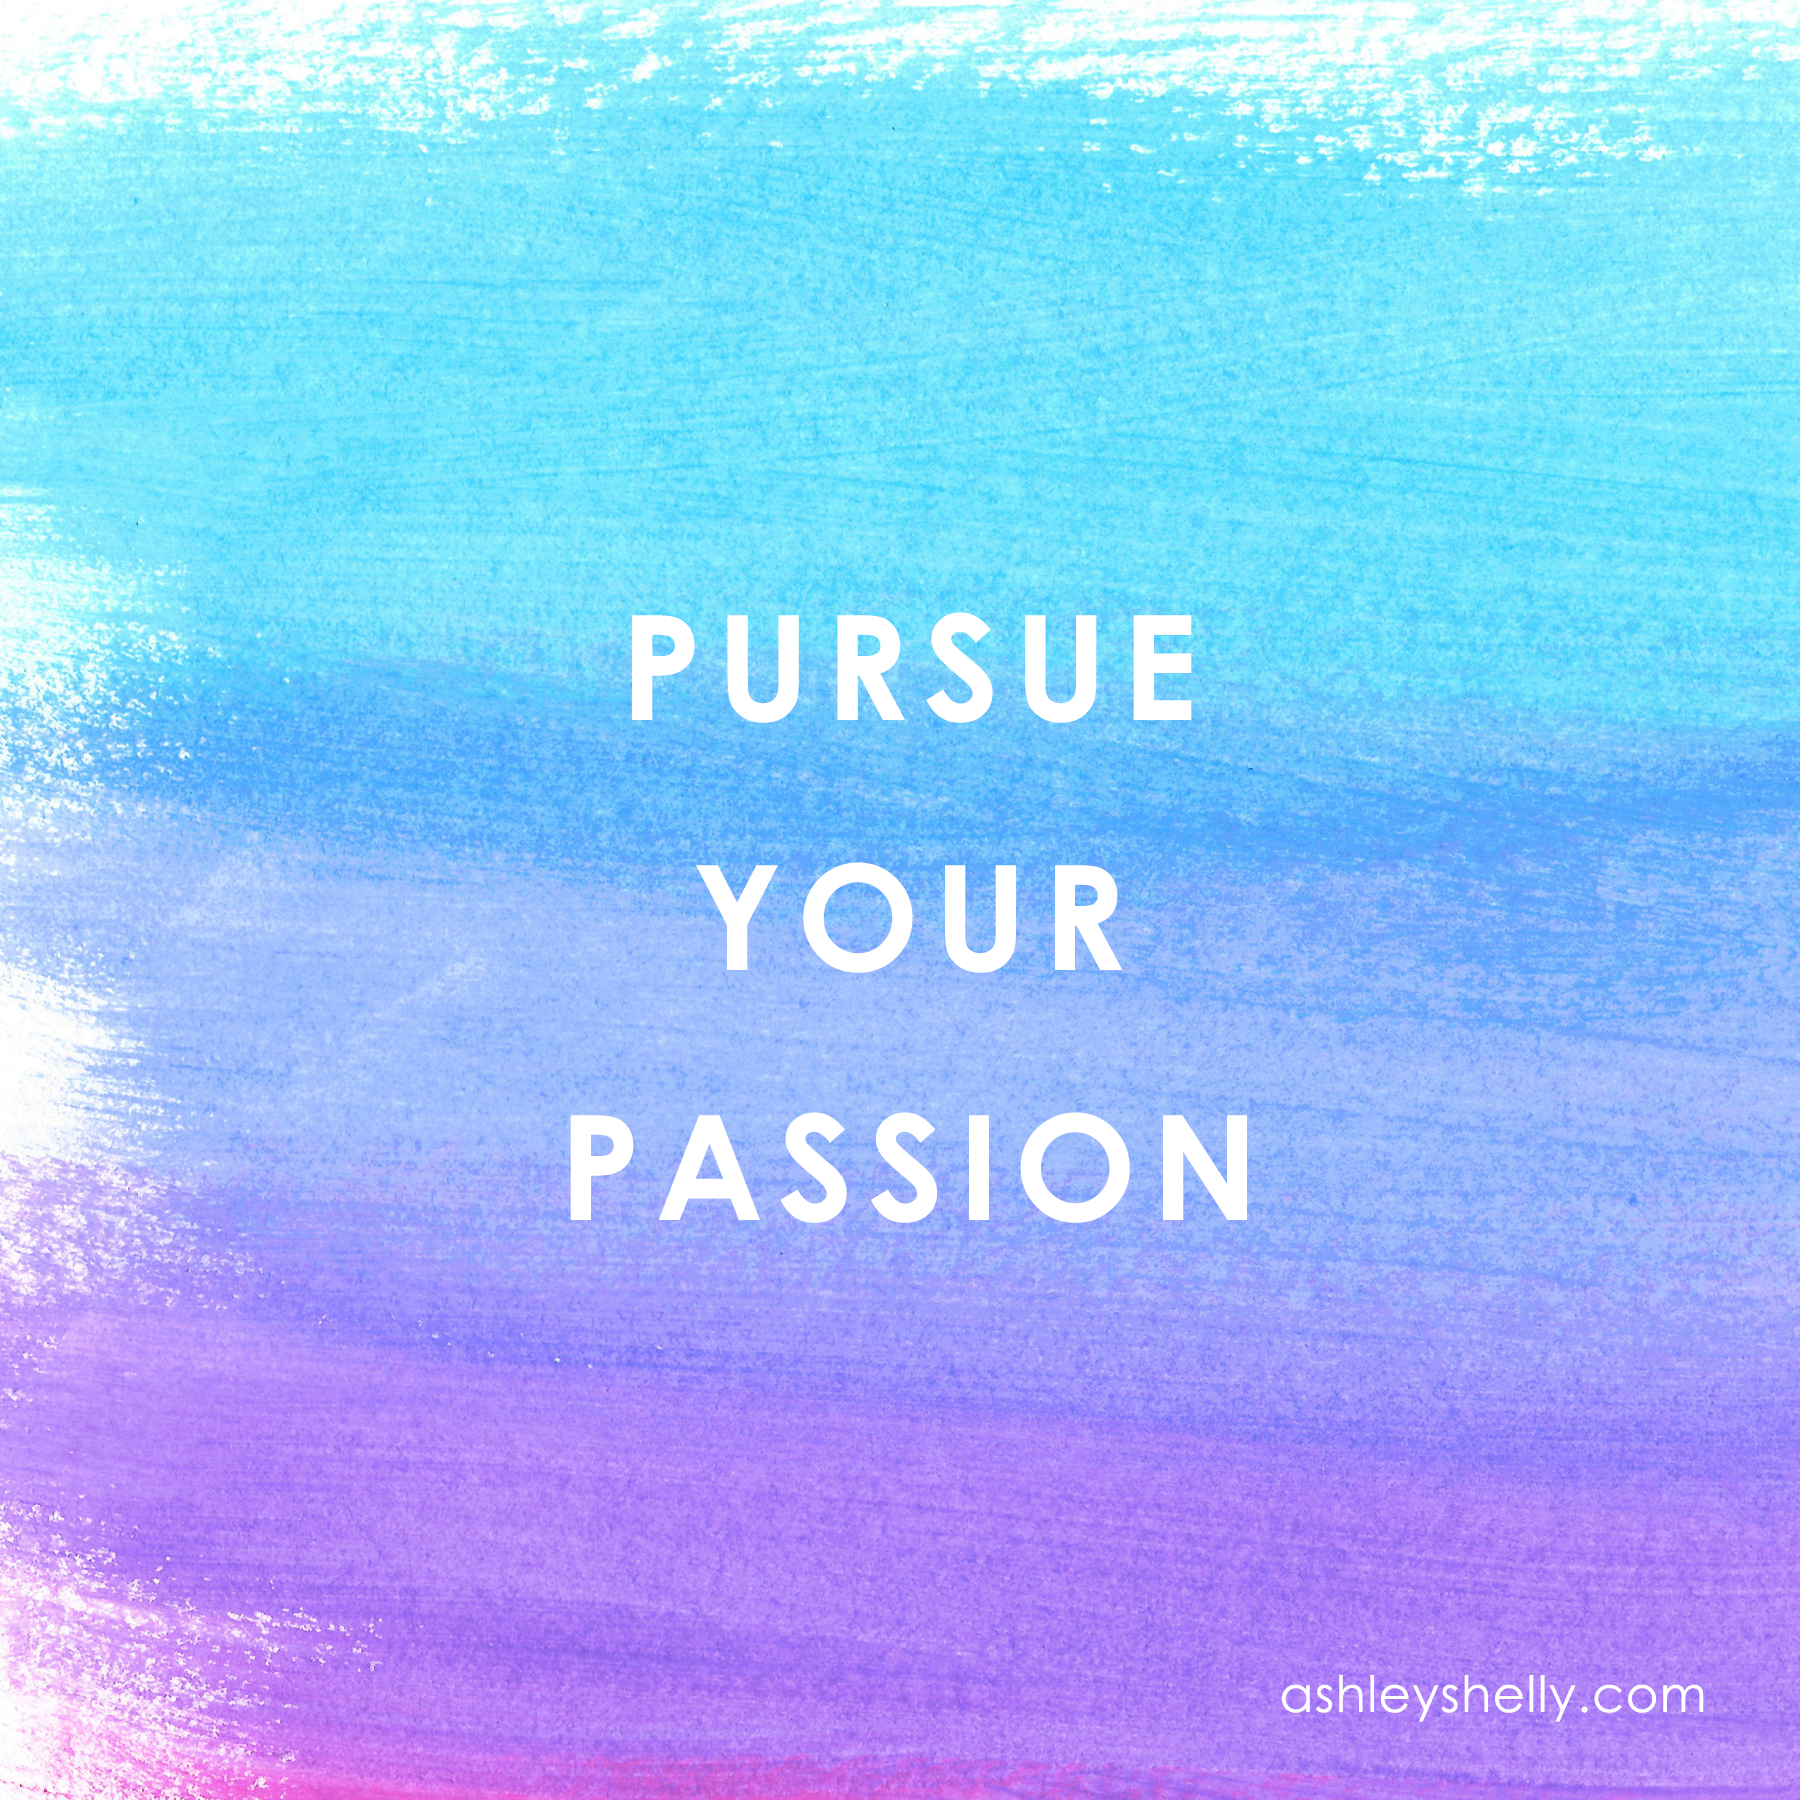 Pursue Your Passion Daily Thought 2 By Ashley Shelly